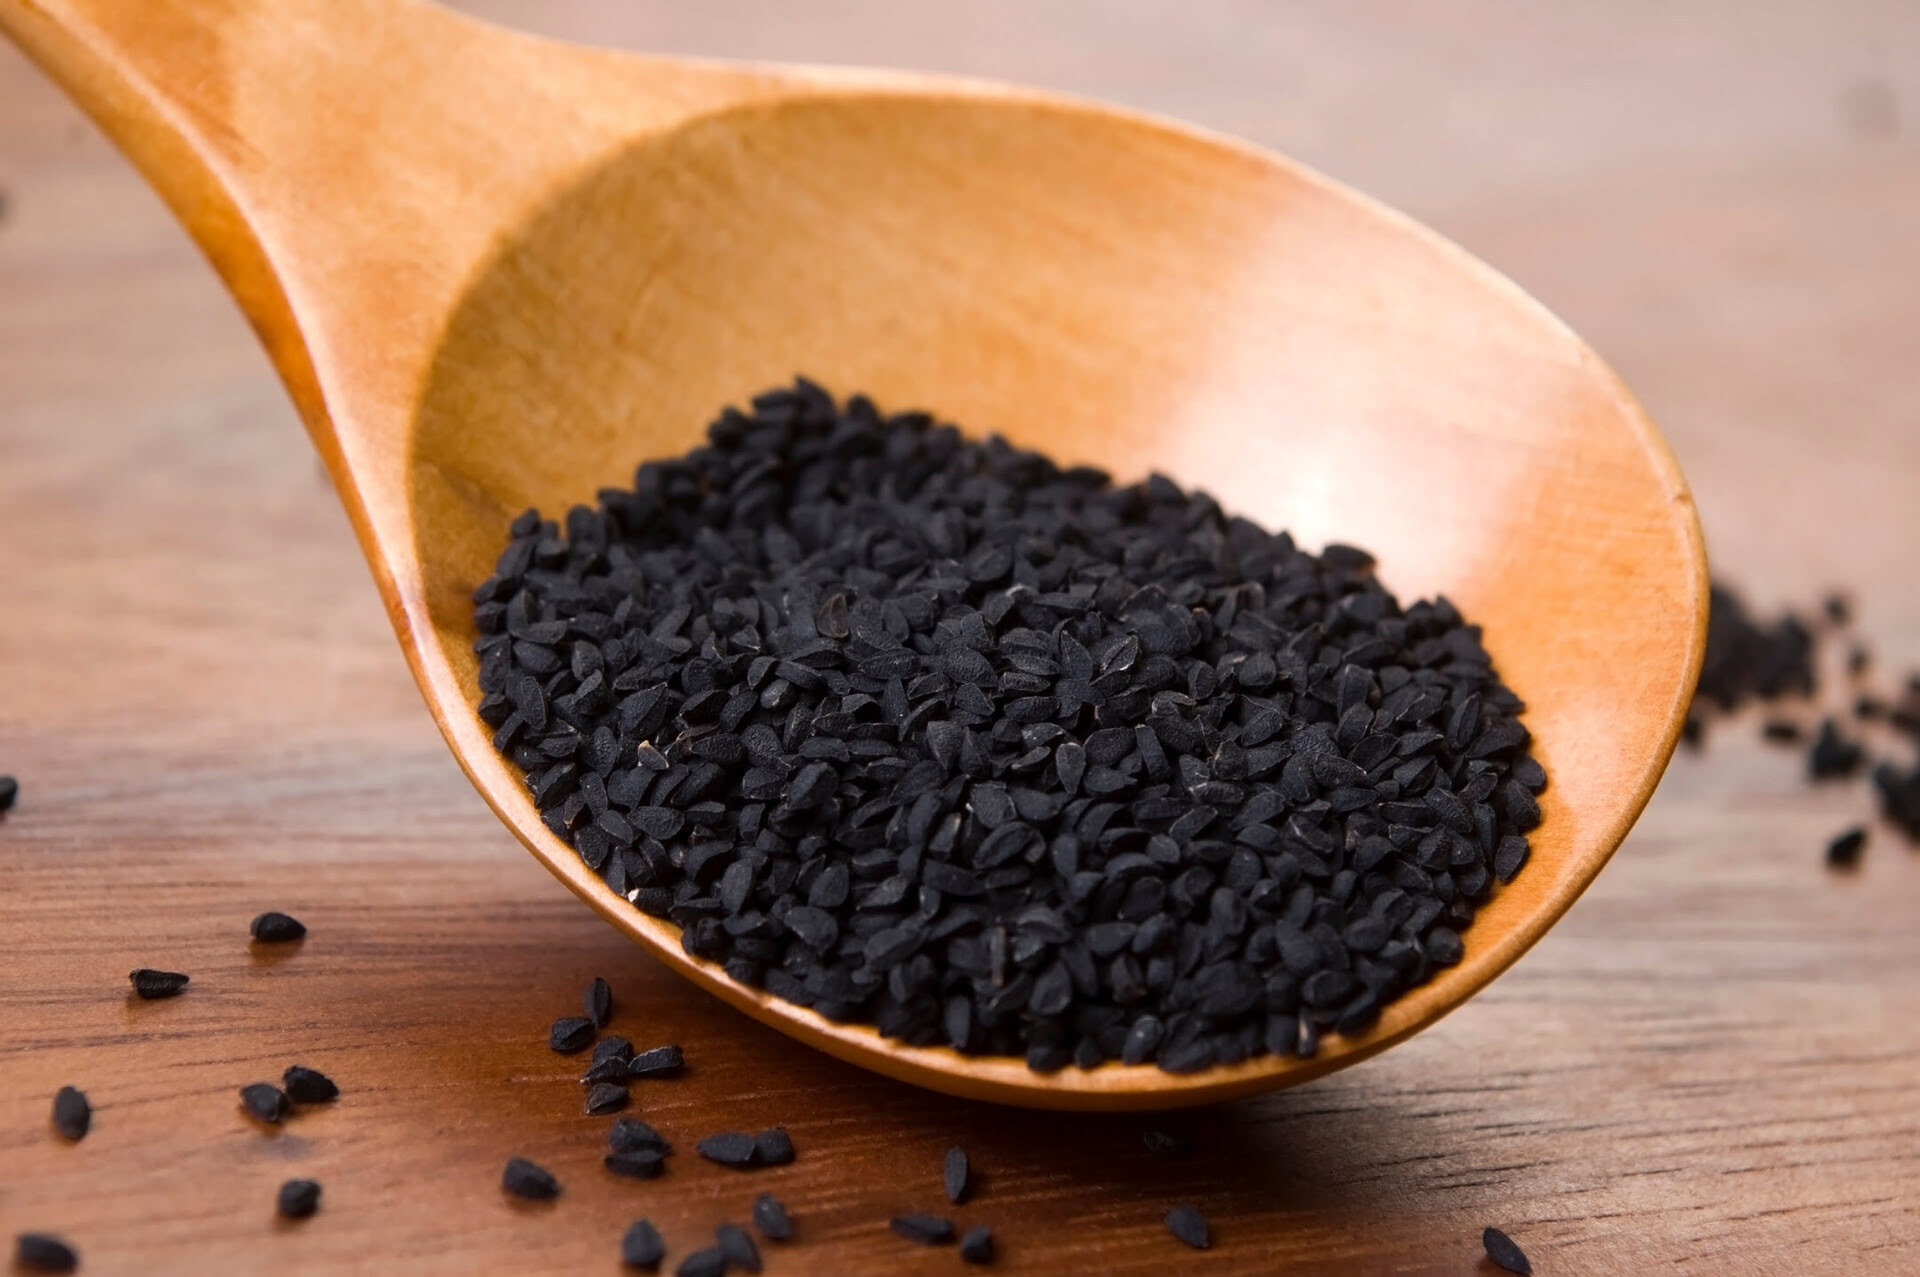 How To Consume Black Seed